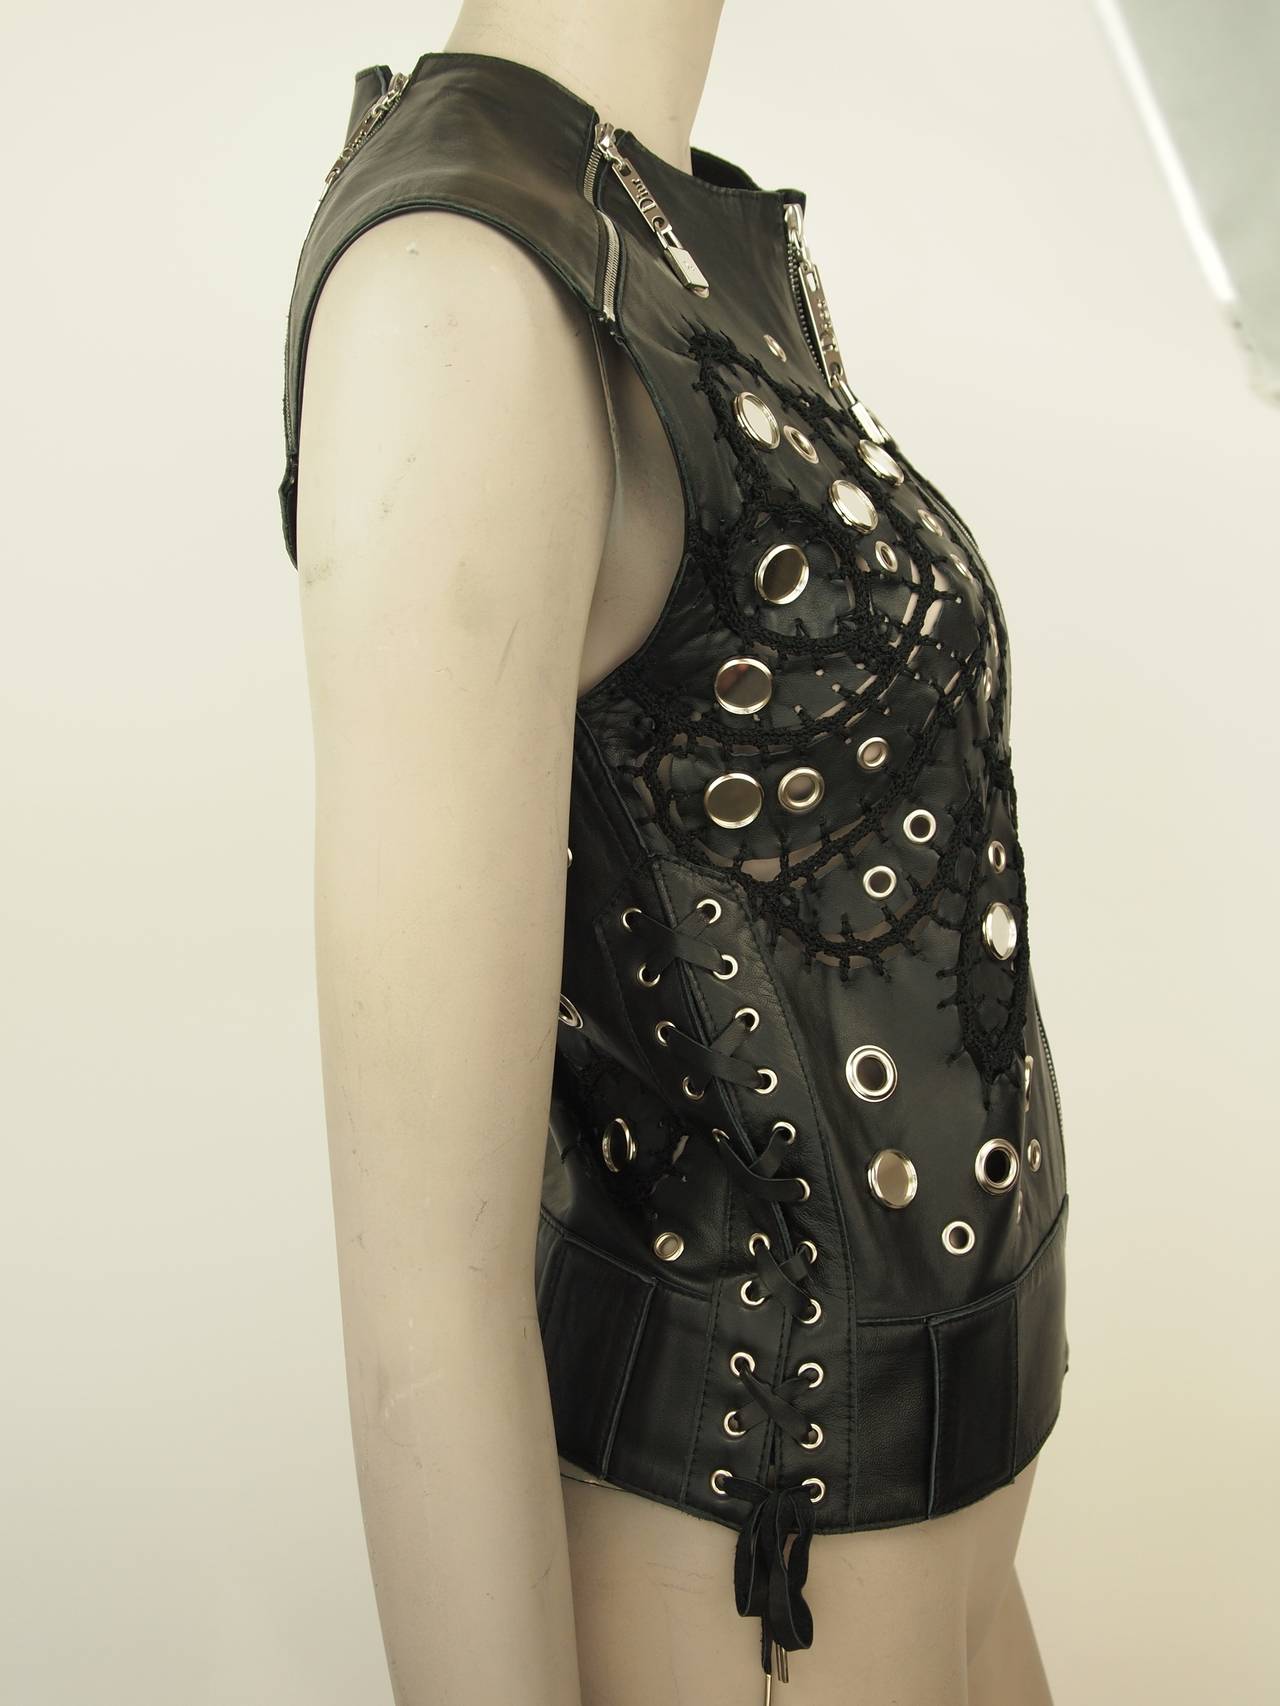 Christian Dior black leather vest with silver-tone hardware, mirror studs, knit seams and front zip closure.